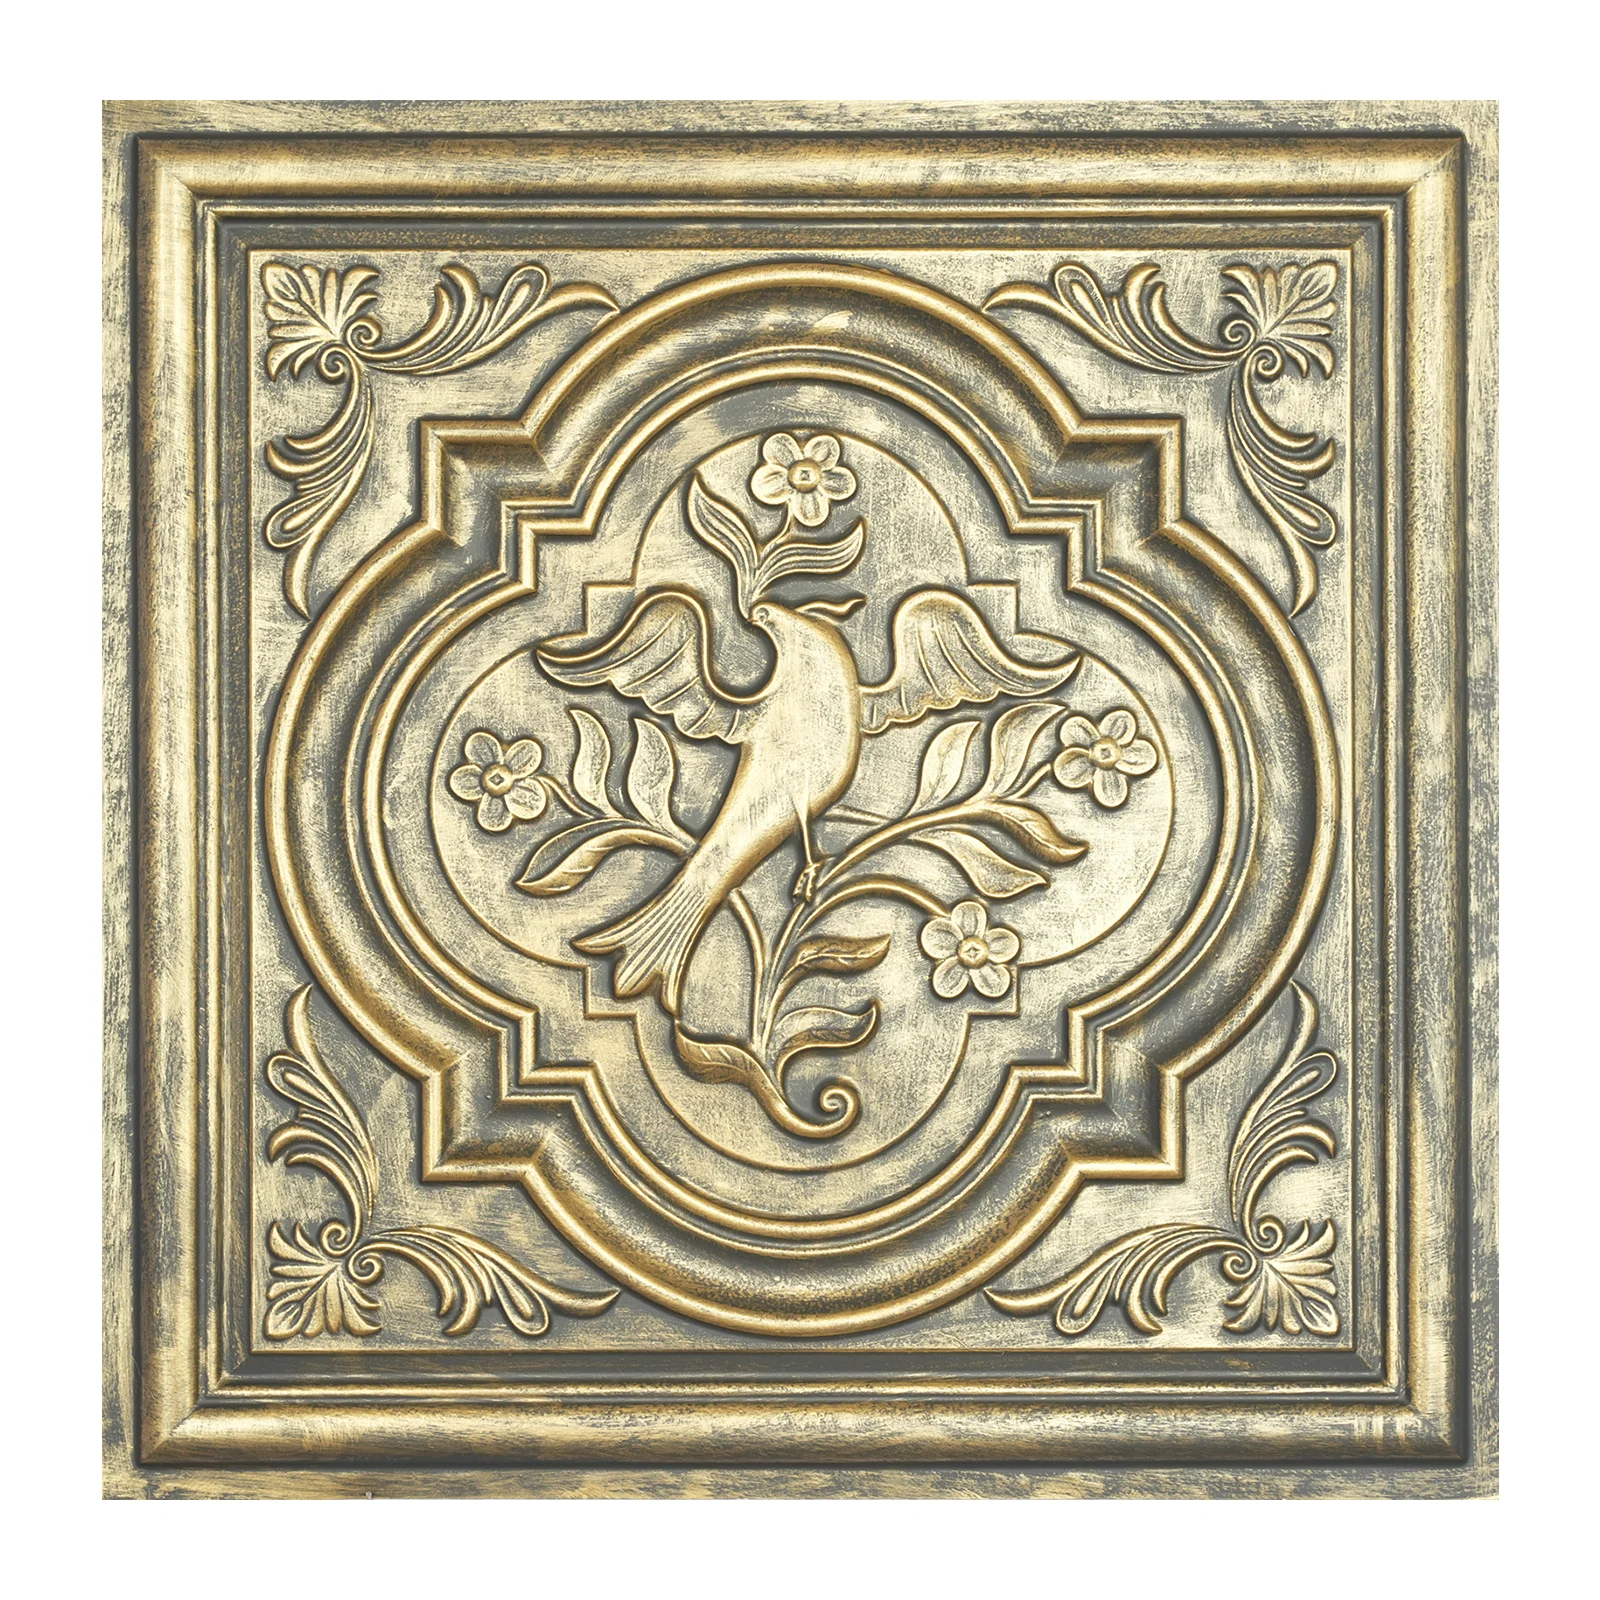 Faux painted distressed Art ceiling tiles Decorative tin wall tile Easy Drop-In Installation PL39 Ancient gold